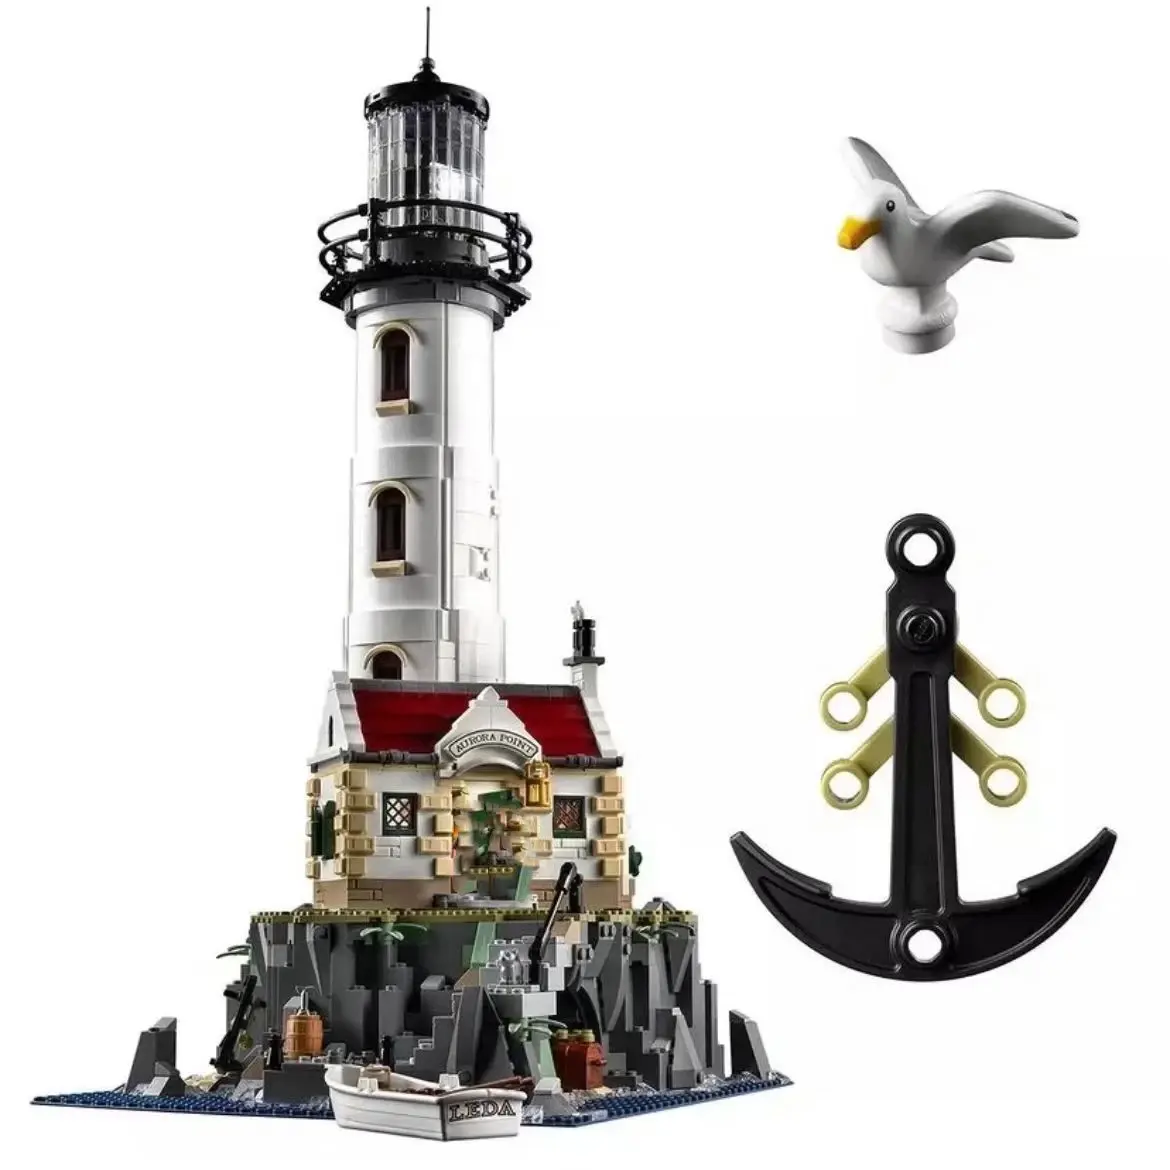 2022 New 2065pcs Electric Compatible Legoingly 21335 Motorized Lighthouse Model Building Block Assembly Kit Children's Toy Gift